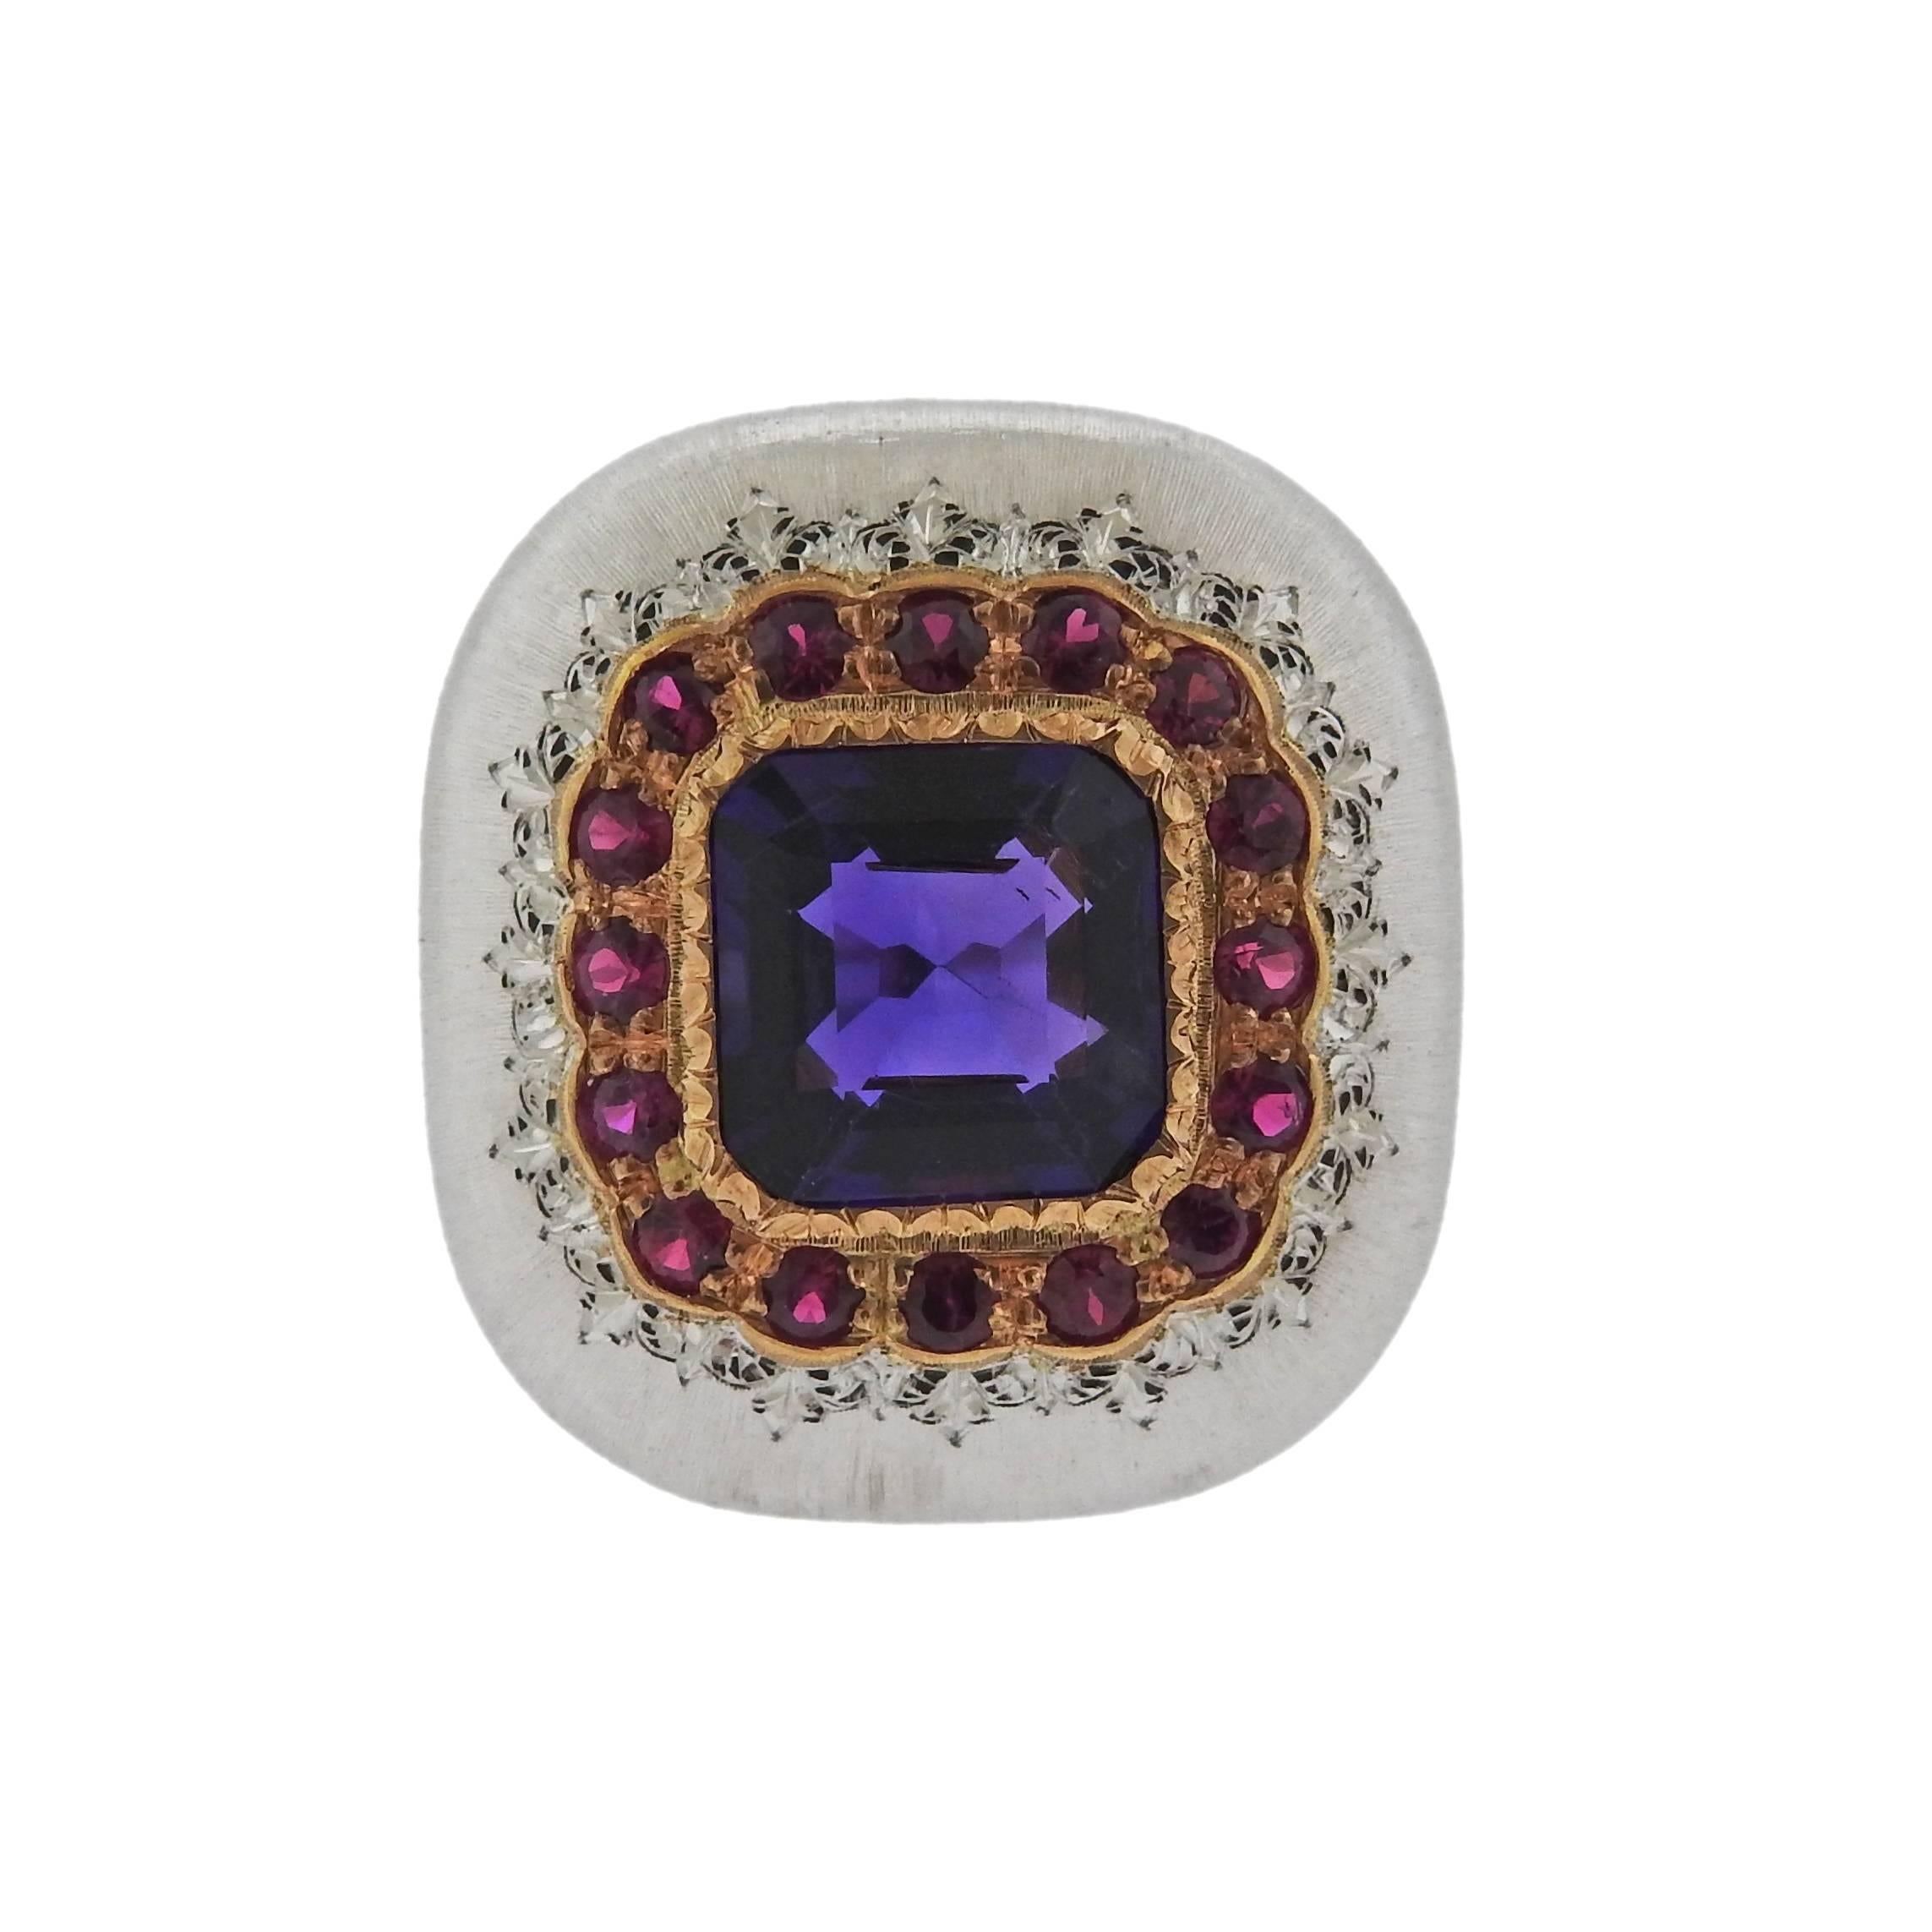 18k gold ring crafted by Buccellati featuring an amethyst center surrounded by rubies. Ring is a size 5.75, ring top is 21mm x 20mm. Marked S6166, Ialy, 18k, Buccellati . Weight is 10.9 grams. Comes with Buccellati paperwork and retails for $20,400.